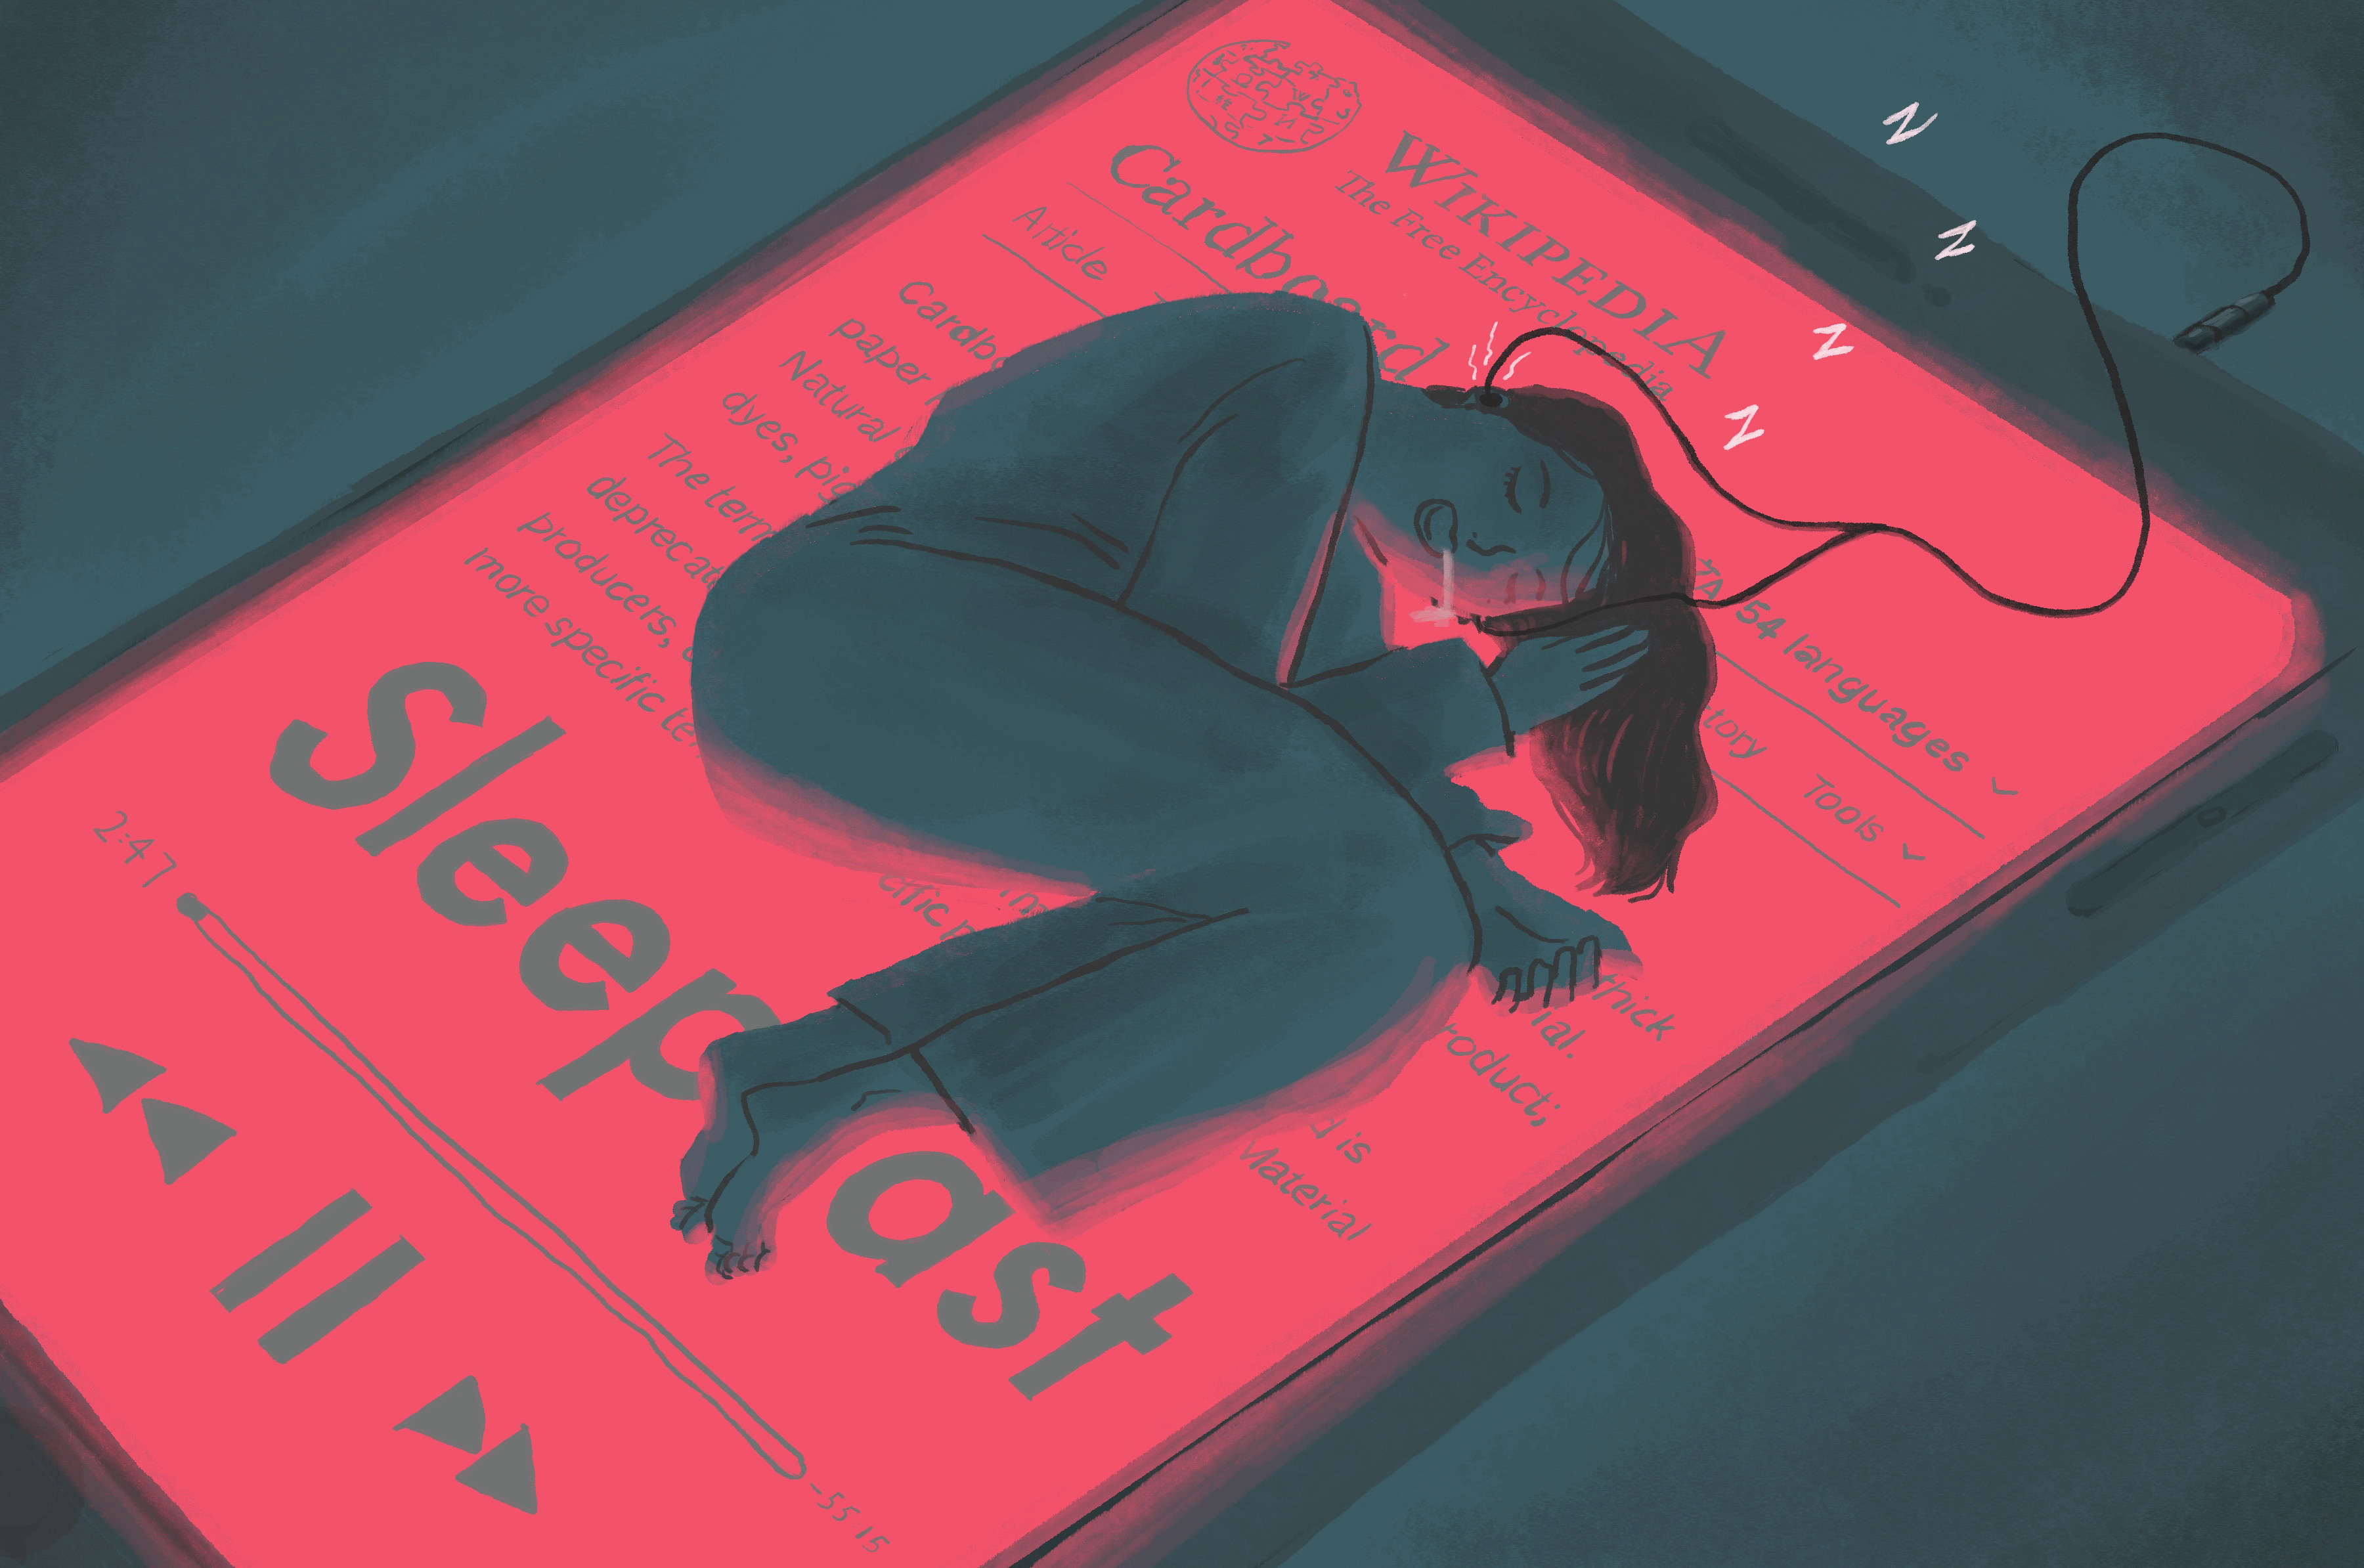 “Sleepcasts” are podcasts to bore you into drifting off – and they reach millions of late-night listeners every month. Illustration: Brian Wang